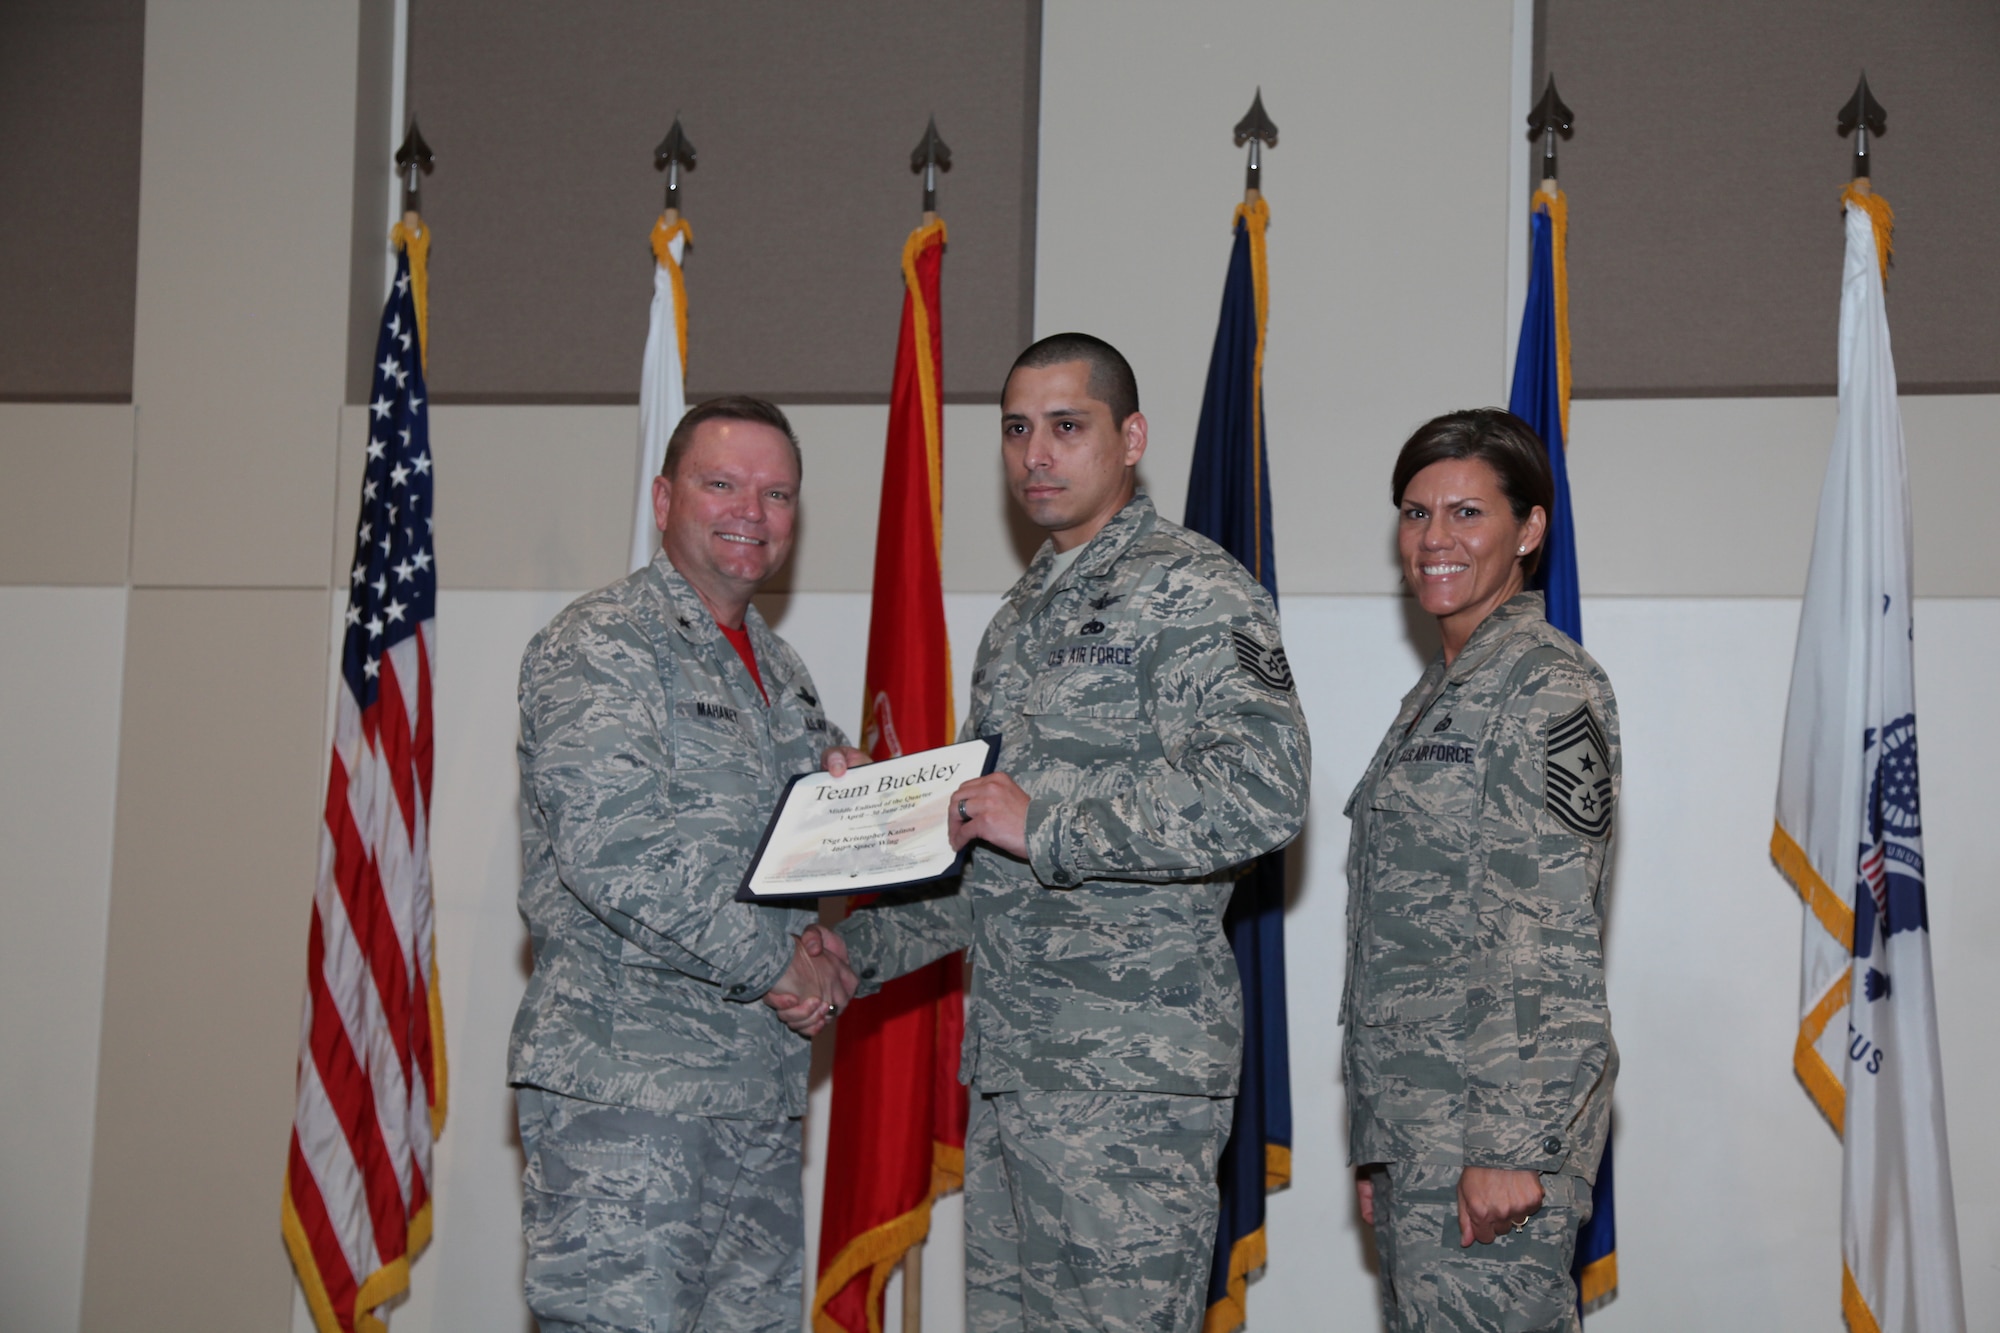 Brig. Gen. Samuel "Bo" Mahaney, Air Reserve Personnel Center commander, and Chief Master Sgt. Ruthe Flores, ARPC command chief, present the Middle Enlisted award to Tech. Sgt. Kristopher Kainoa, 460th Space Wing during the Team Buckley quarterly awards ceremony Aug. 8 on Buckley Air Force Base, Colo. (U.S. Air Force photo/Quinn Jacobson)